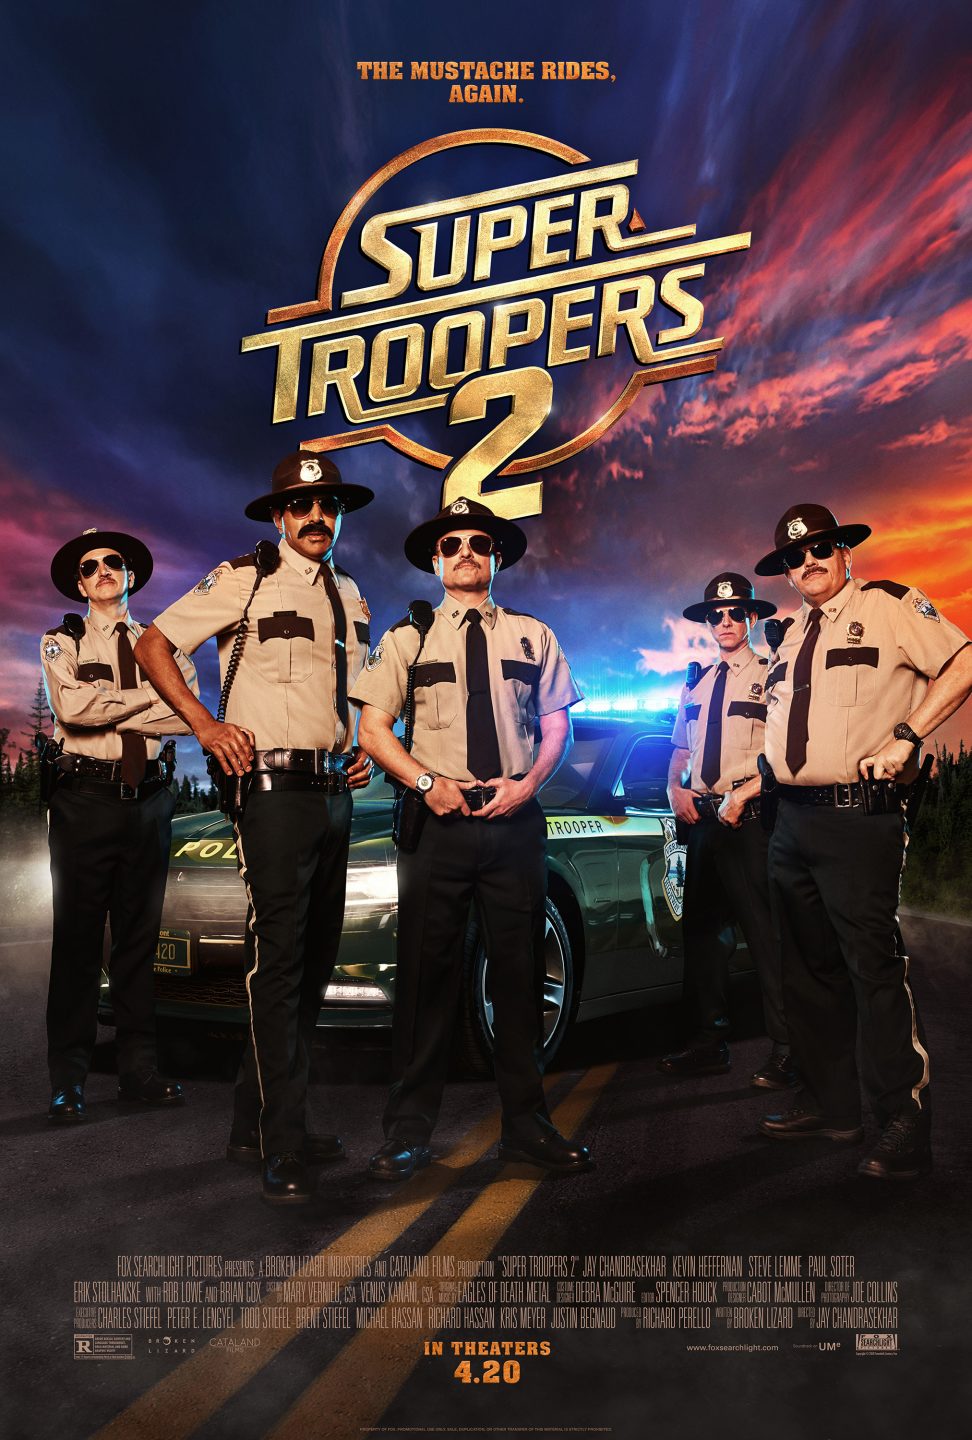 Super Troopers 2 poster (Fox Searchlight)